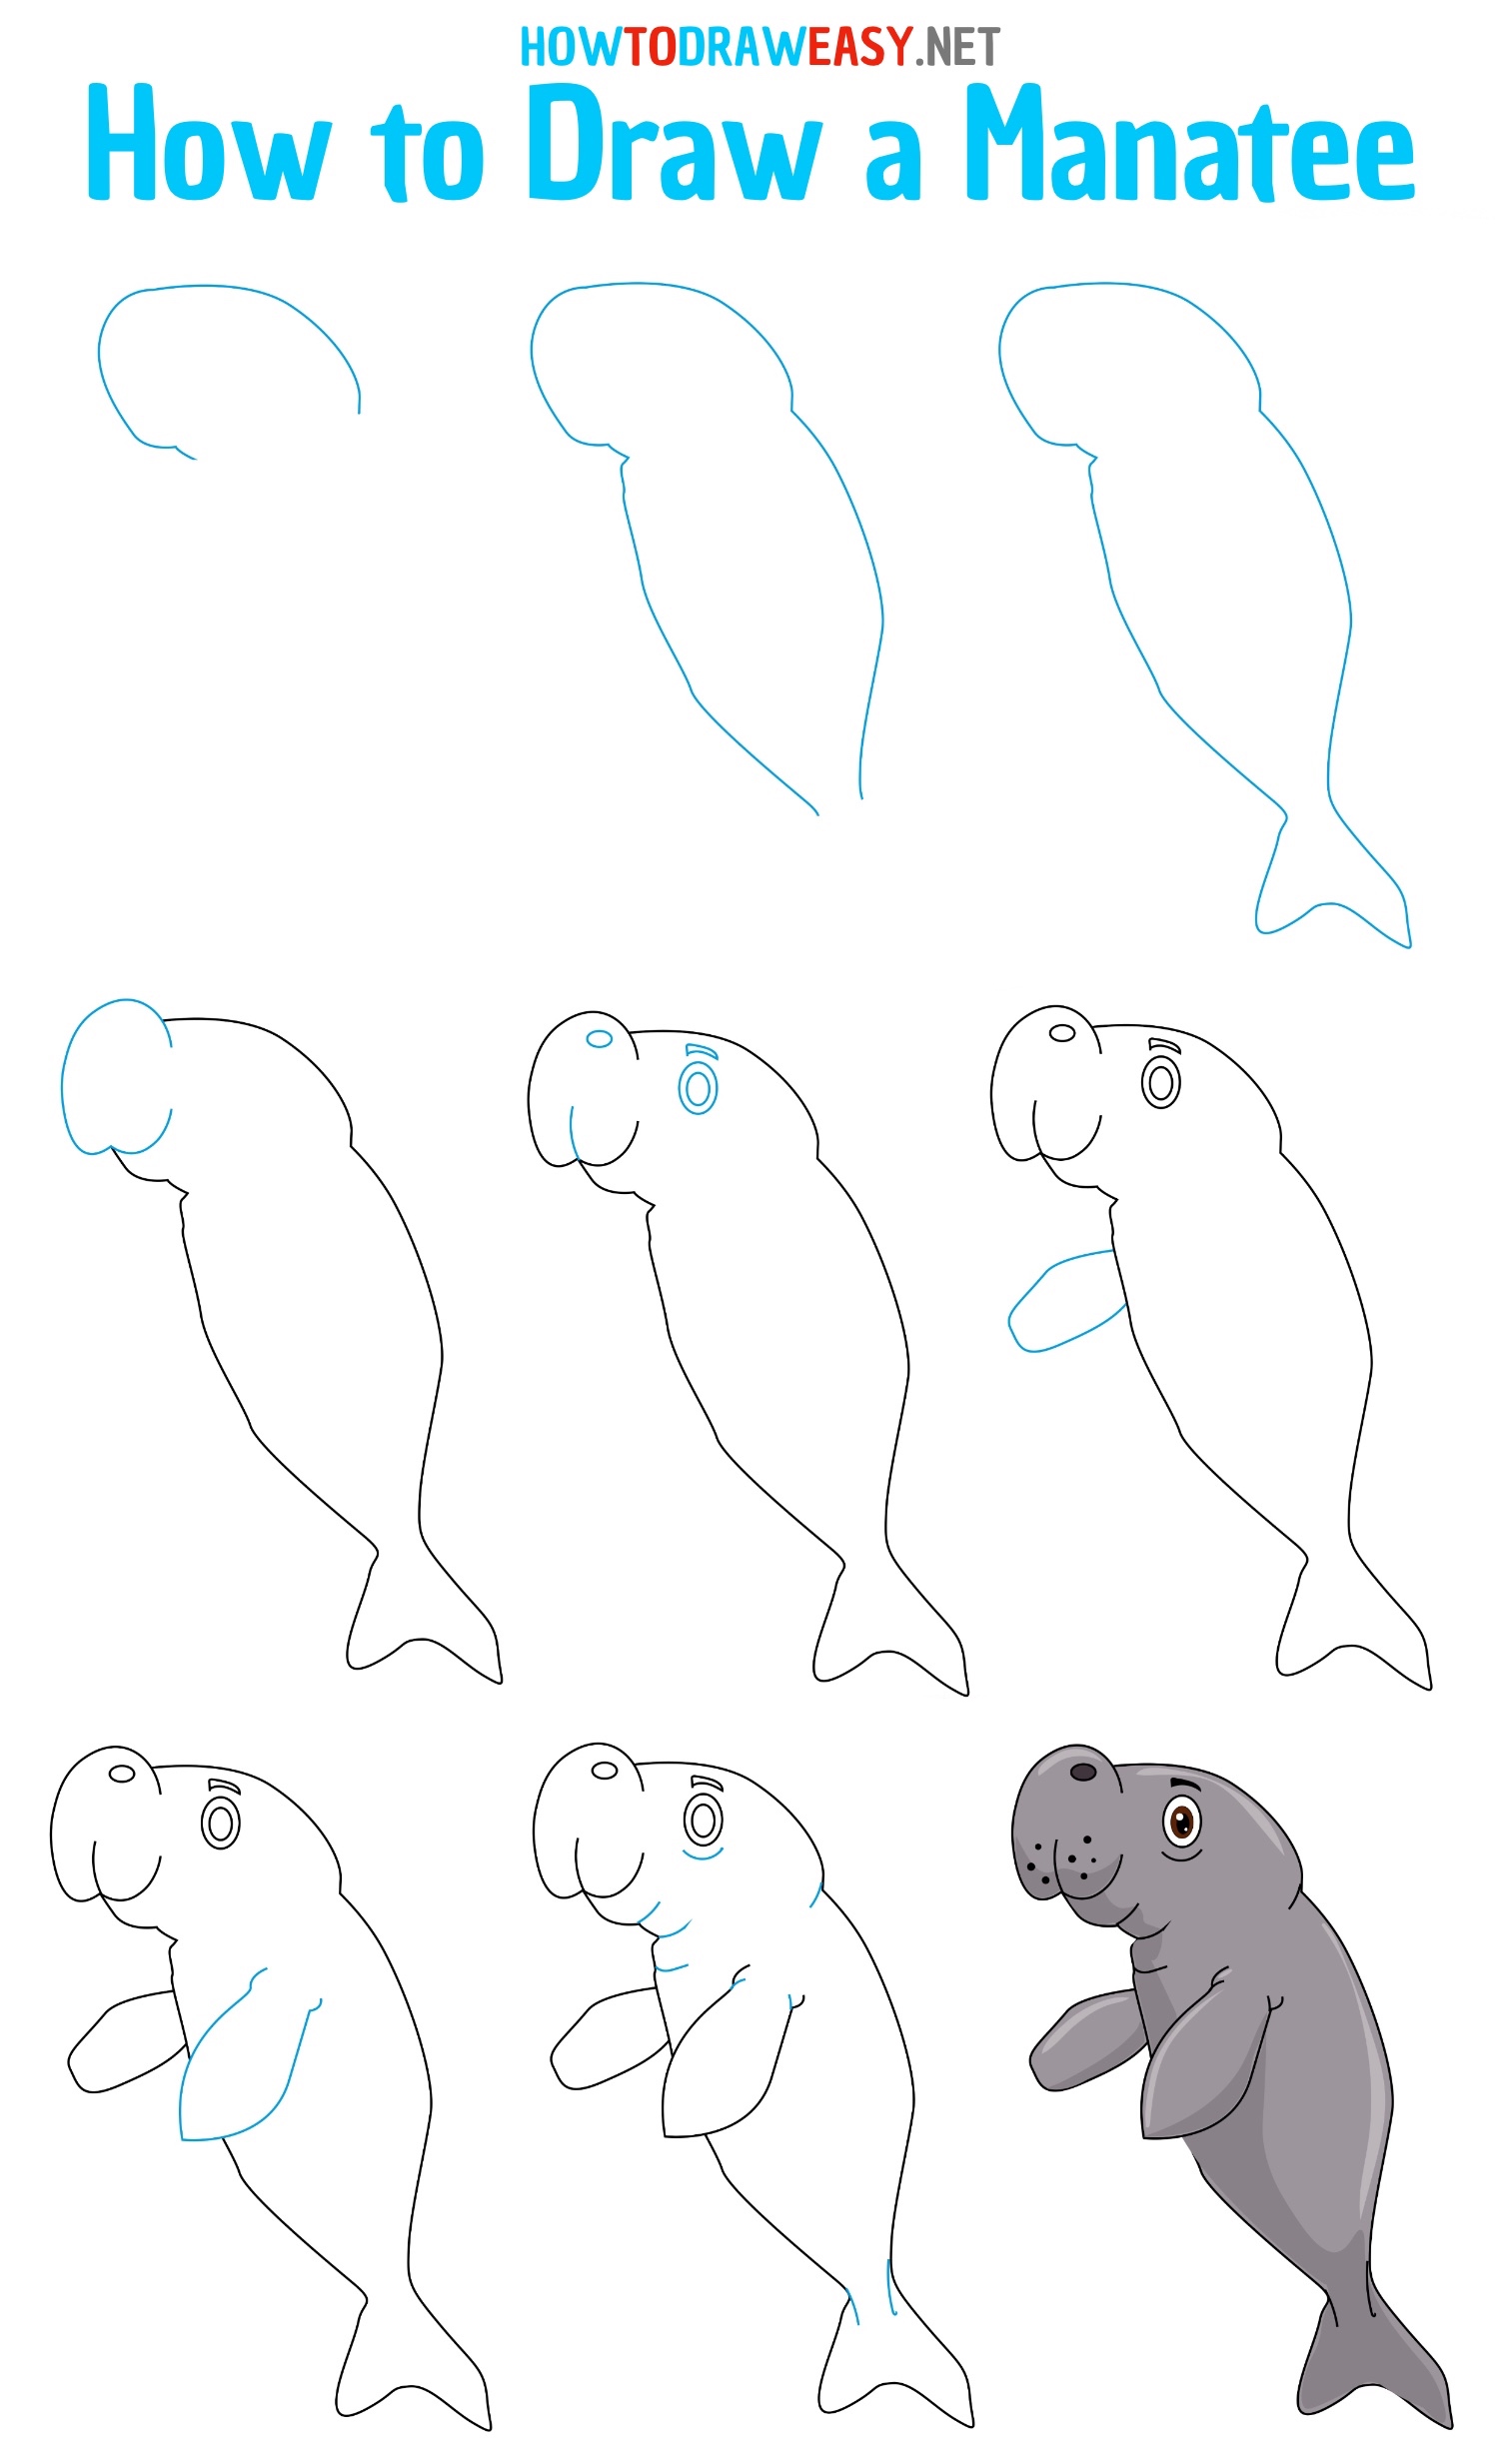 How to Draw a Manatee Step by Step